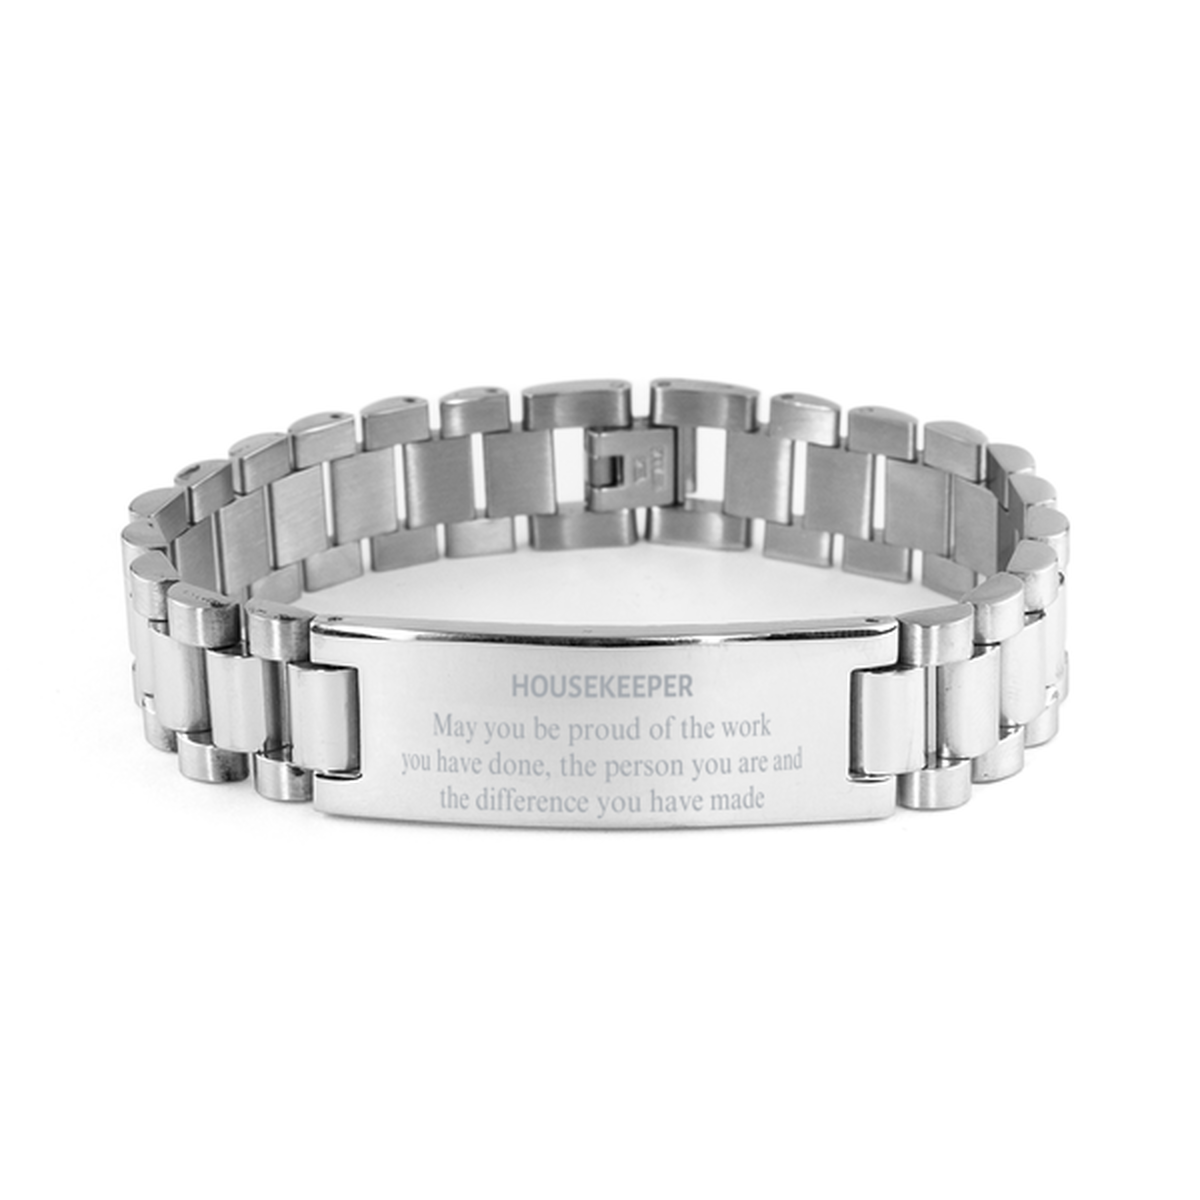 Housekeeper May you be proud of the work you have done, Retirement Housekeeper Ladder Stainless Steel Bracelet for Colleague Appreciation Gifts Amazing for Housekeeper